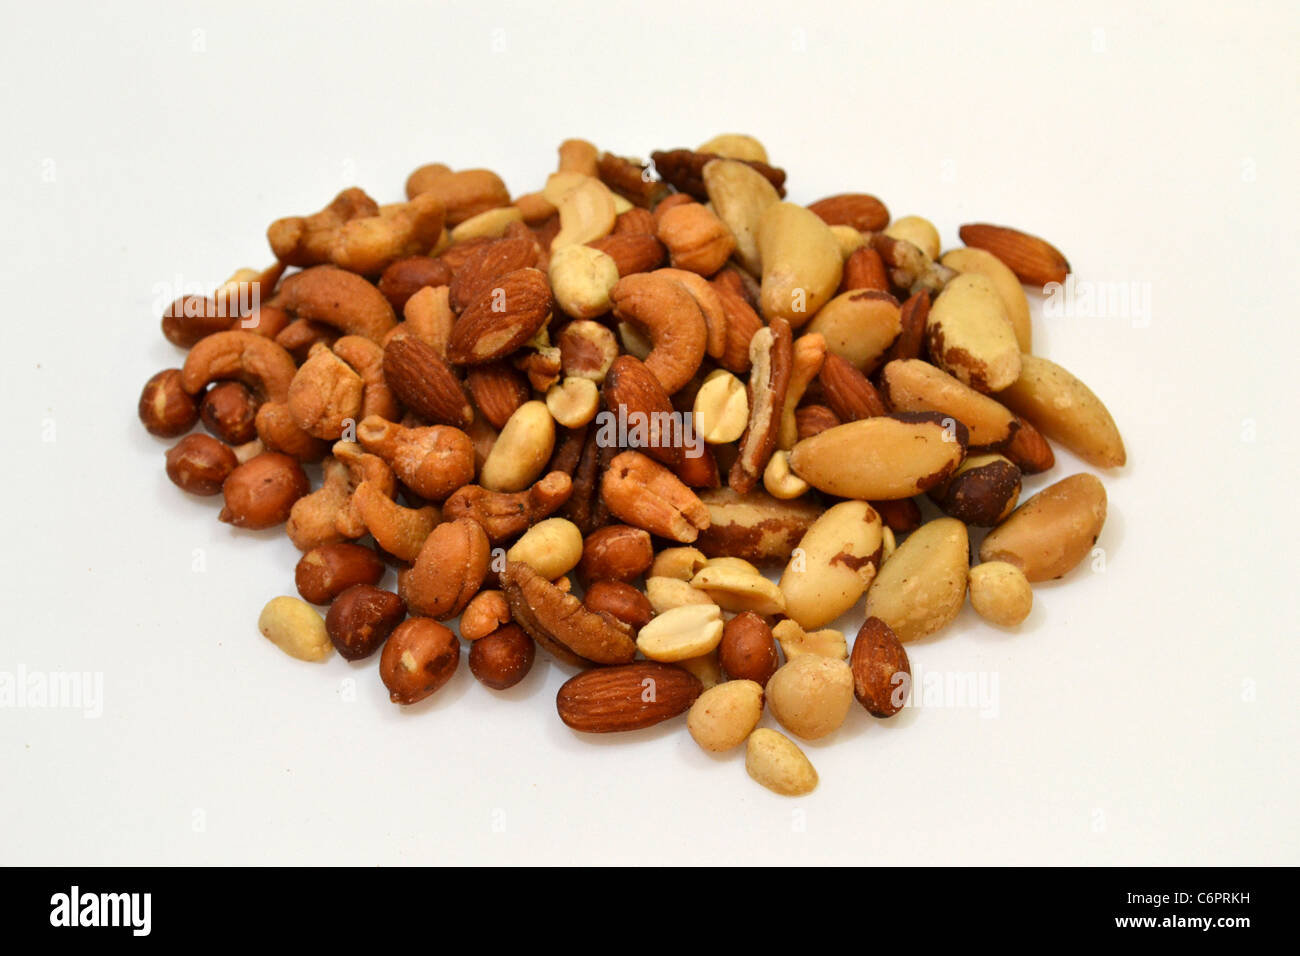 A pile of mixed nuts laying on a plain white background. Stock Photo